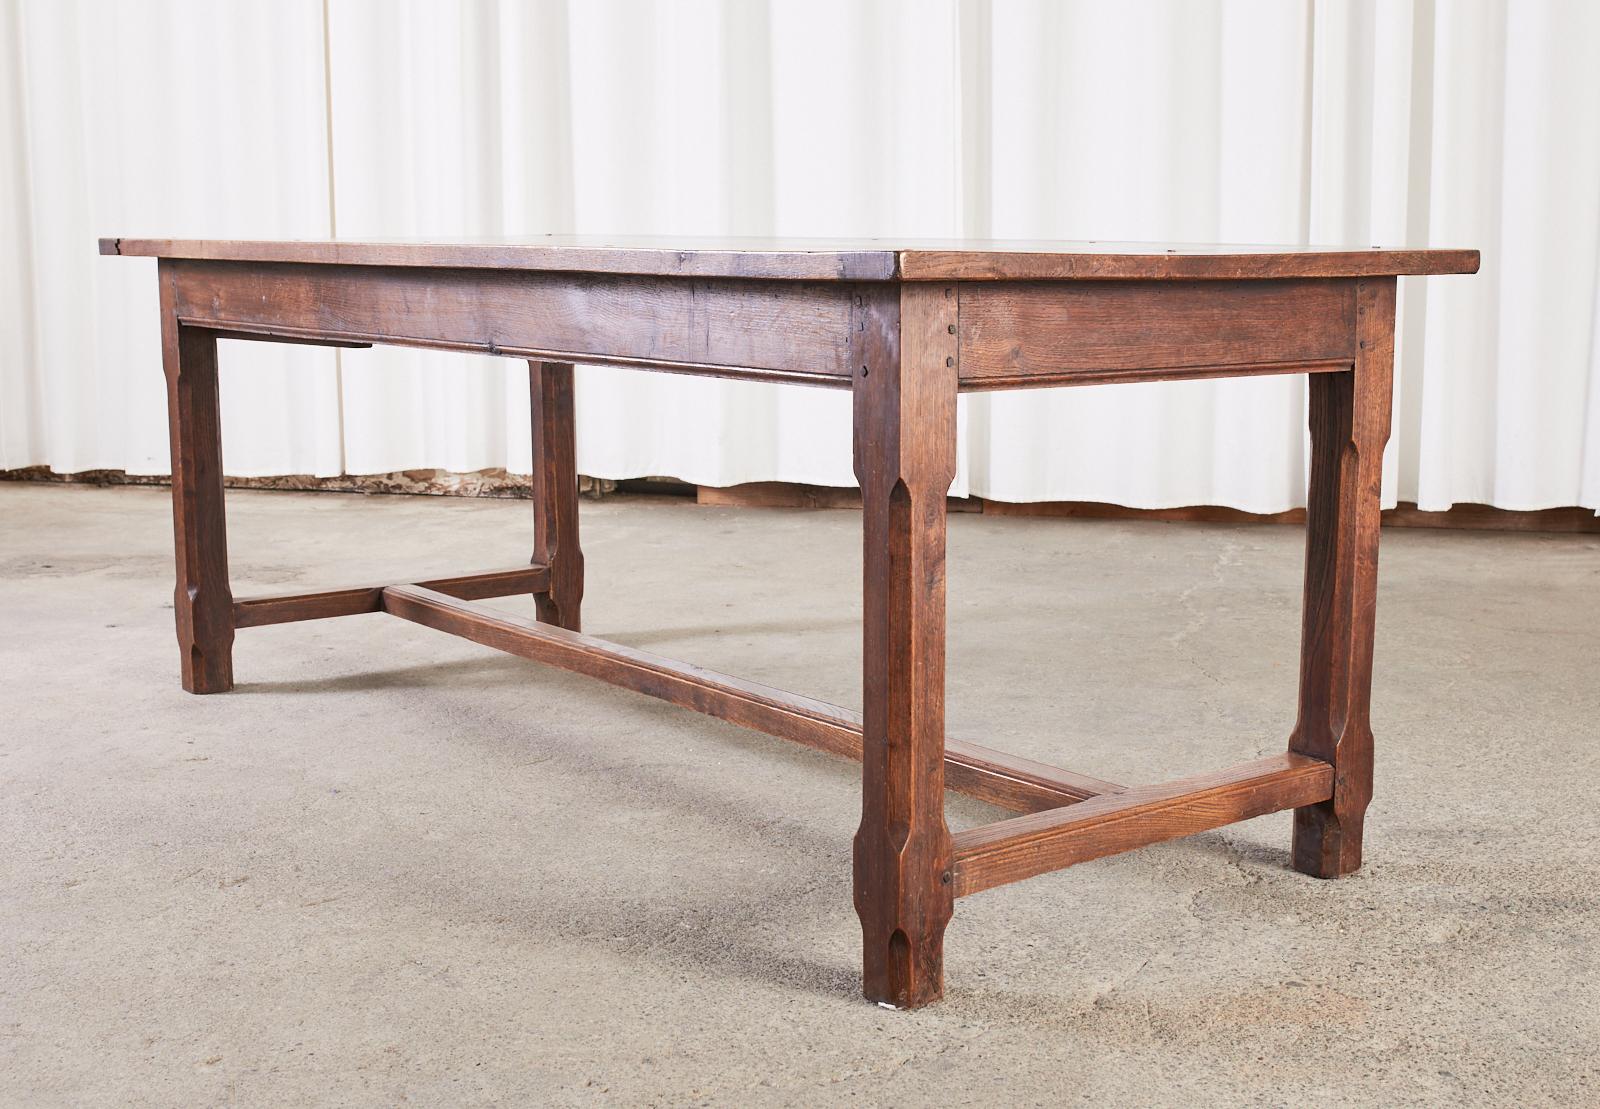 Hand-Crafted Country French Provincial Oak Farmhouse Trestle Dining Table